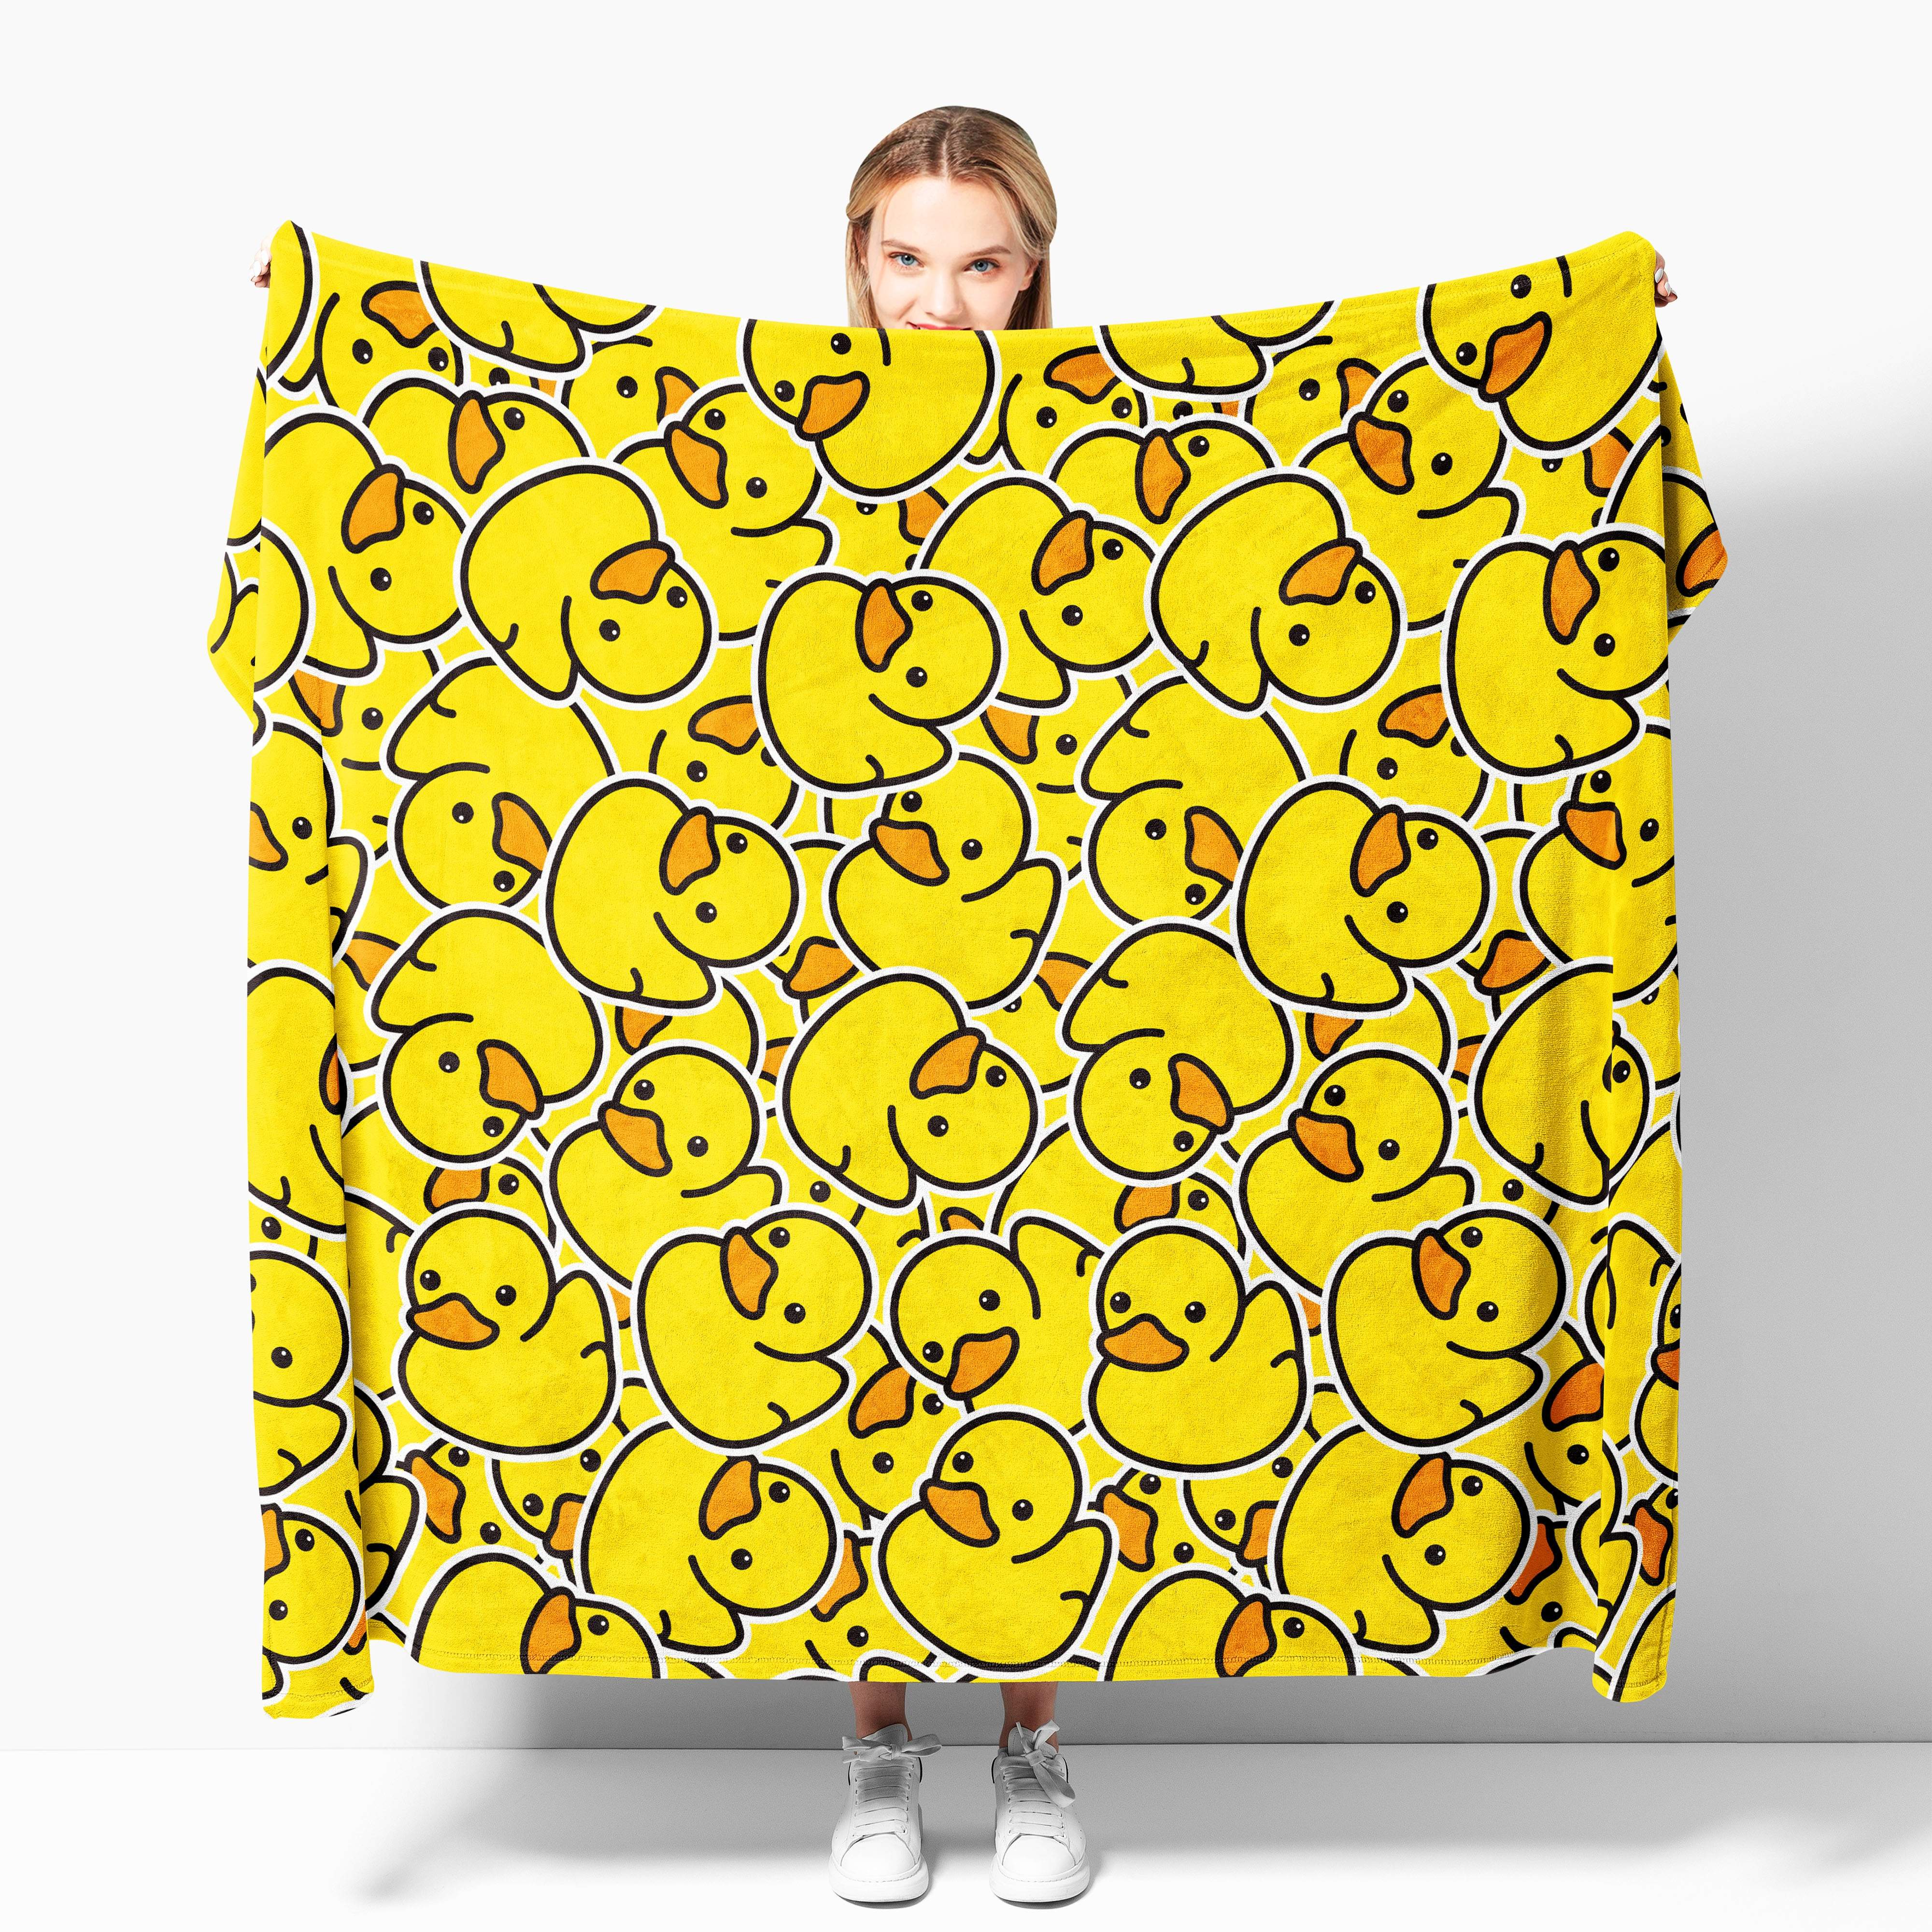 

1pc Little Yellow Duck Print Gift Blanket, Lightweight Comfortable Flannel All Season Blanket For Office, Couch Lunch Break, Camping Travel Blanket